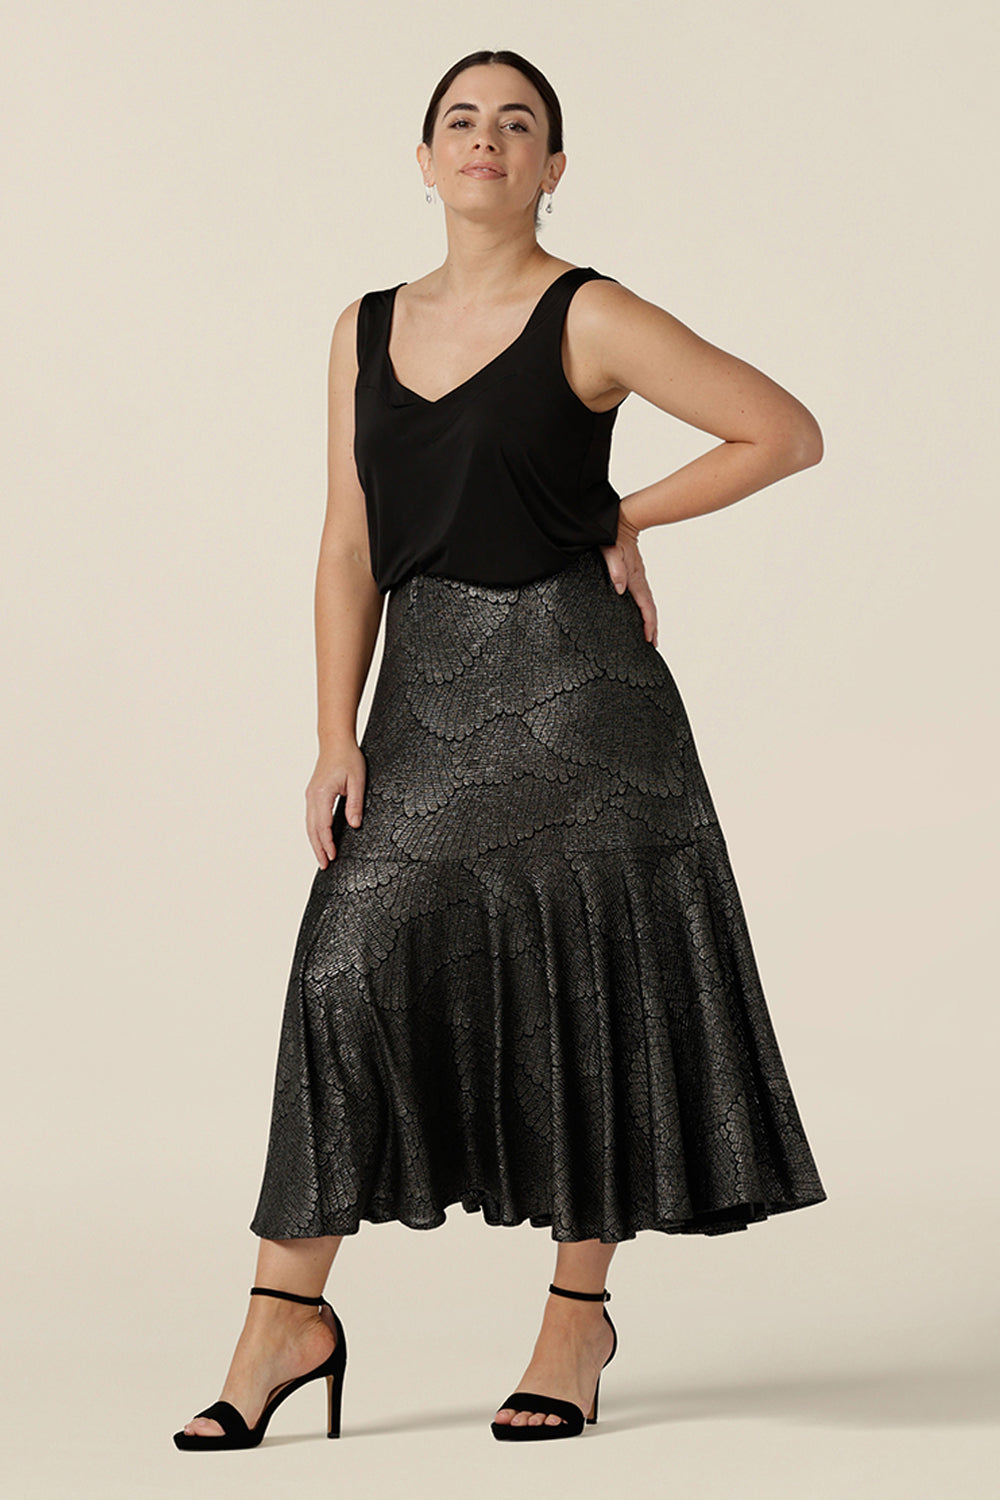 A size 10, petite height woman wears a midi length, foil print evening skirt with ruffle hem. Styled with a black cami top as a cocktail wear outfit, both are made in Australia by women's fashion brand, Leina & Fleur. Shop evening and cocktail wear online in sizes 8 to 24.